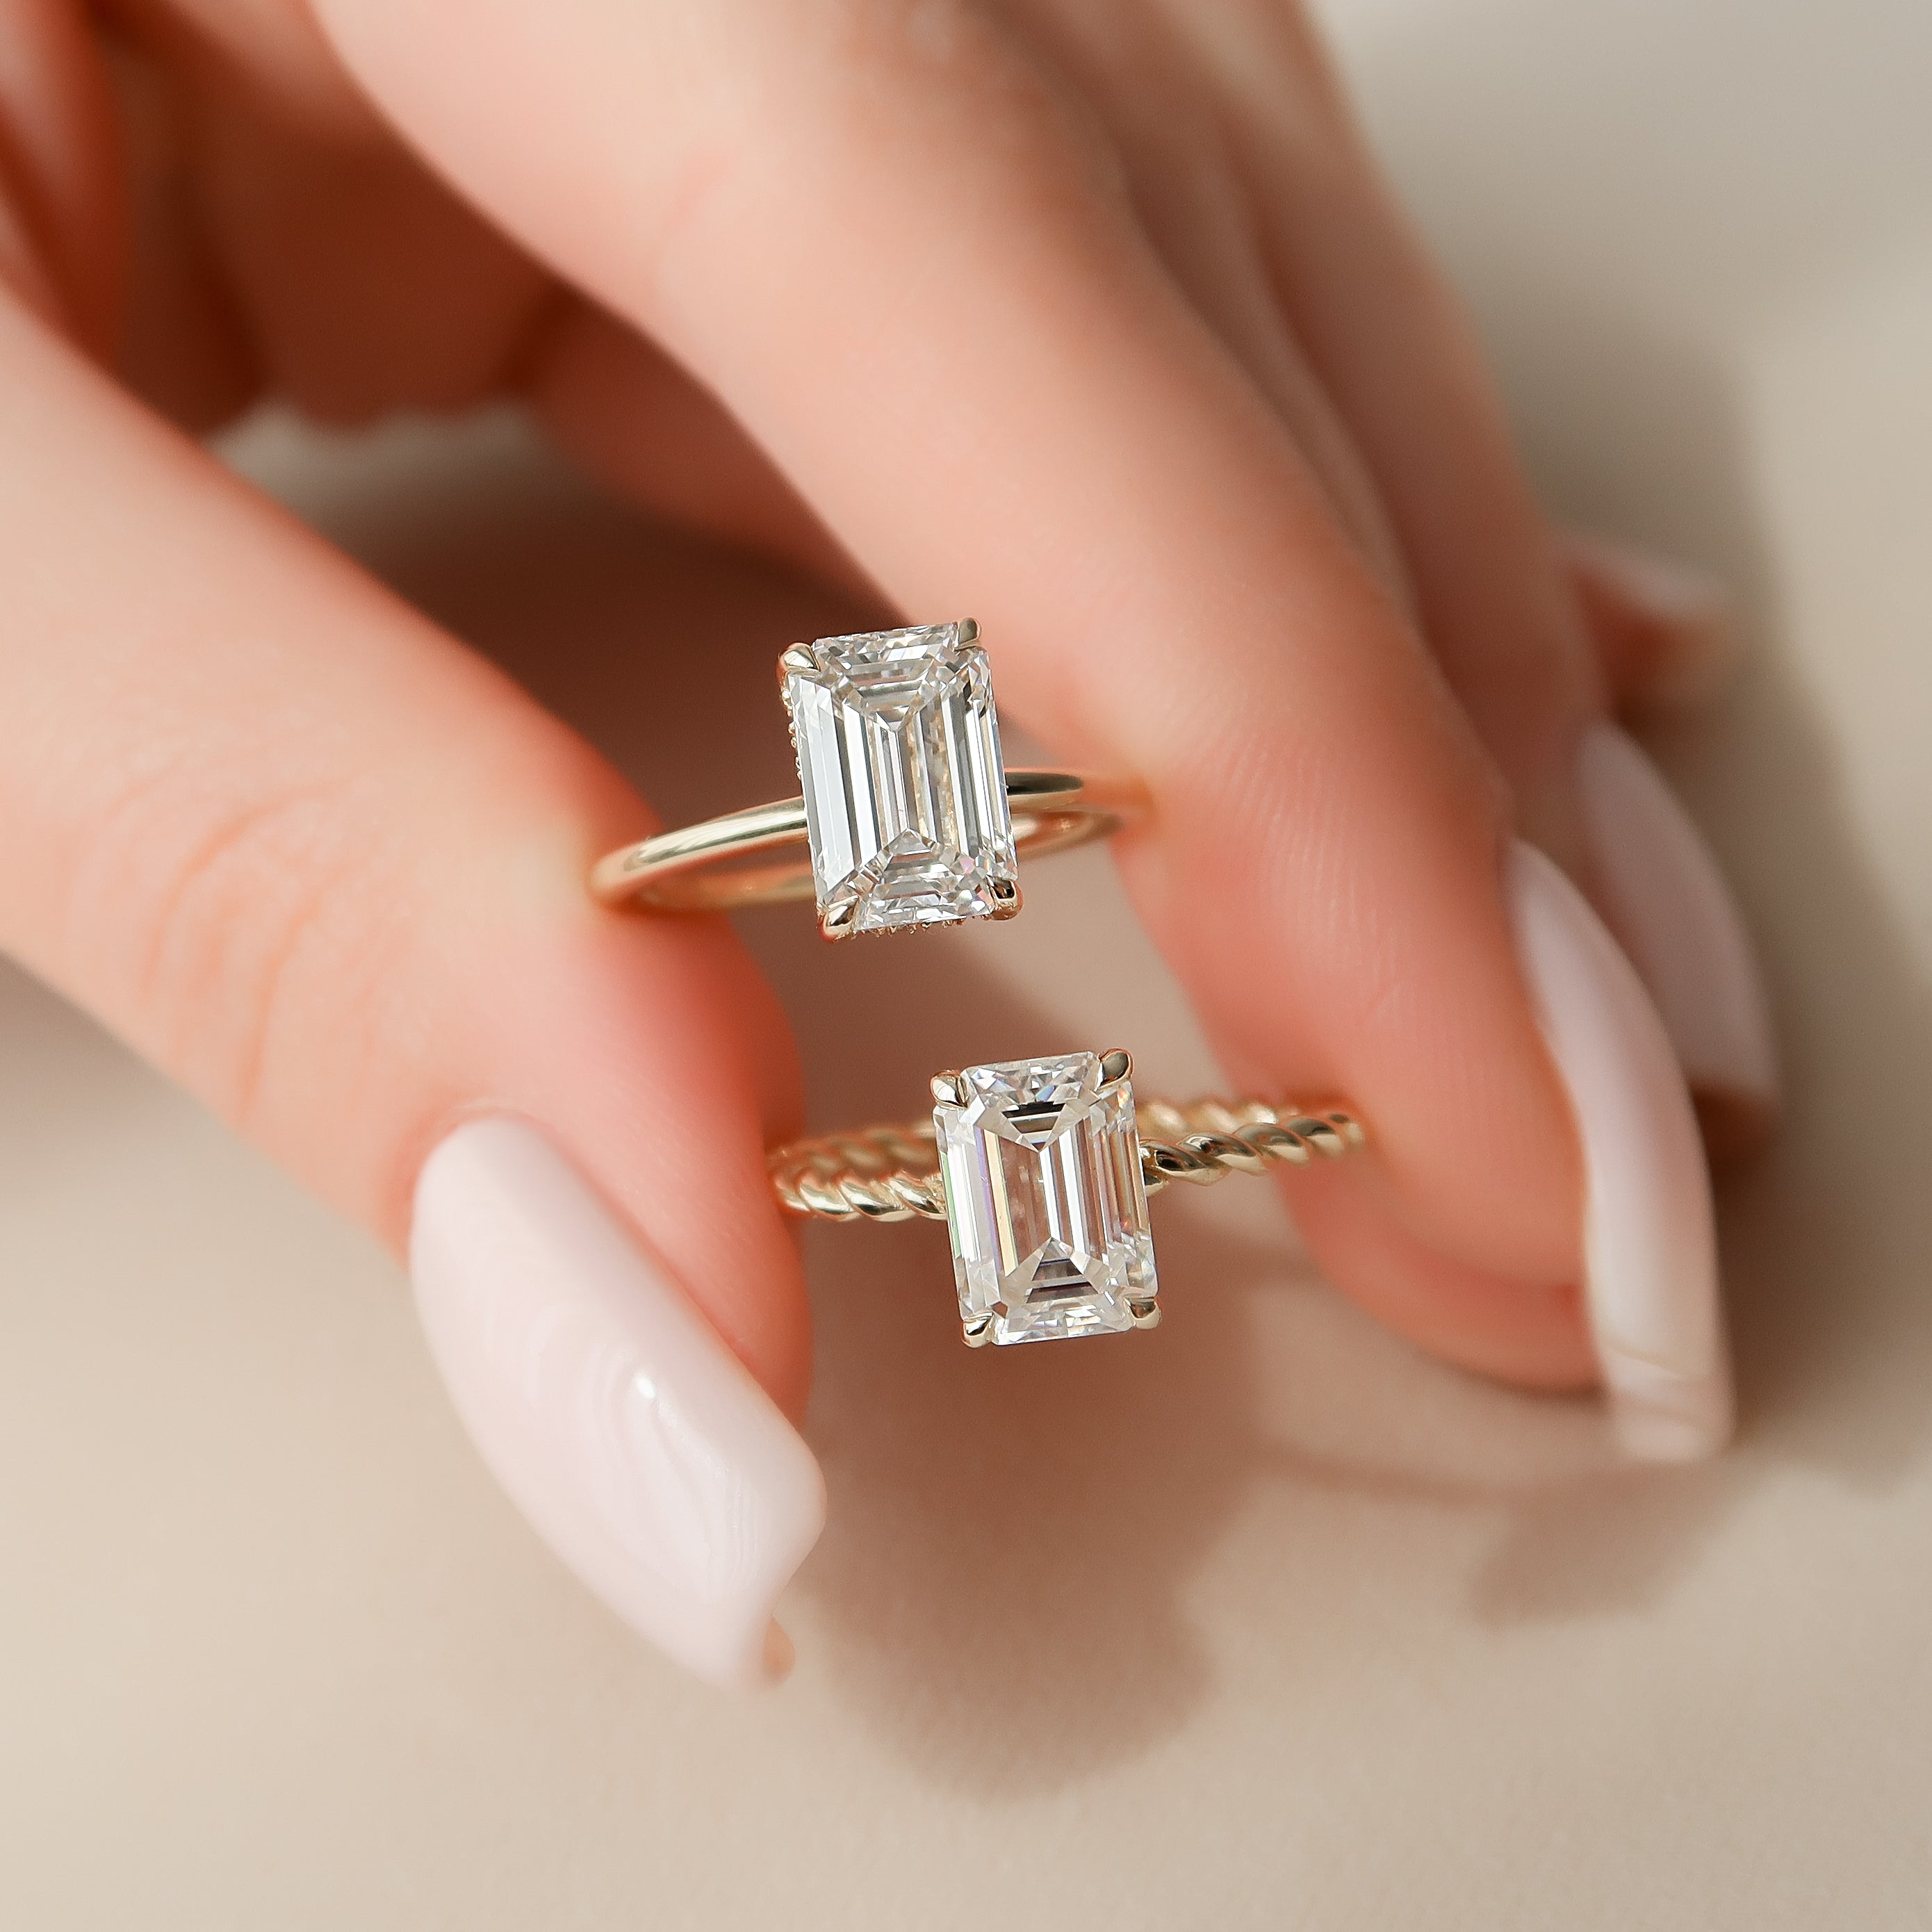 The ultimate emerald cut engagement rings | The Jewellery Editor